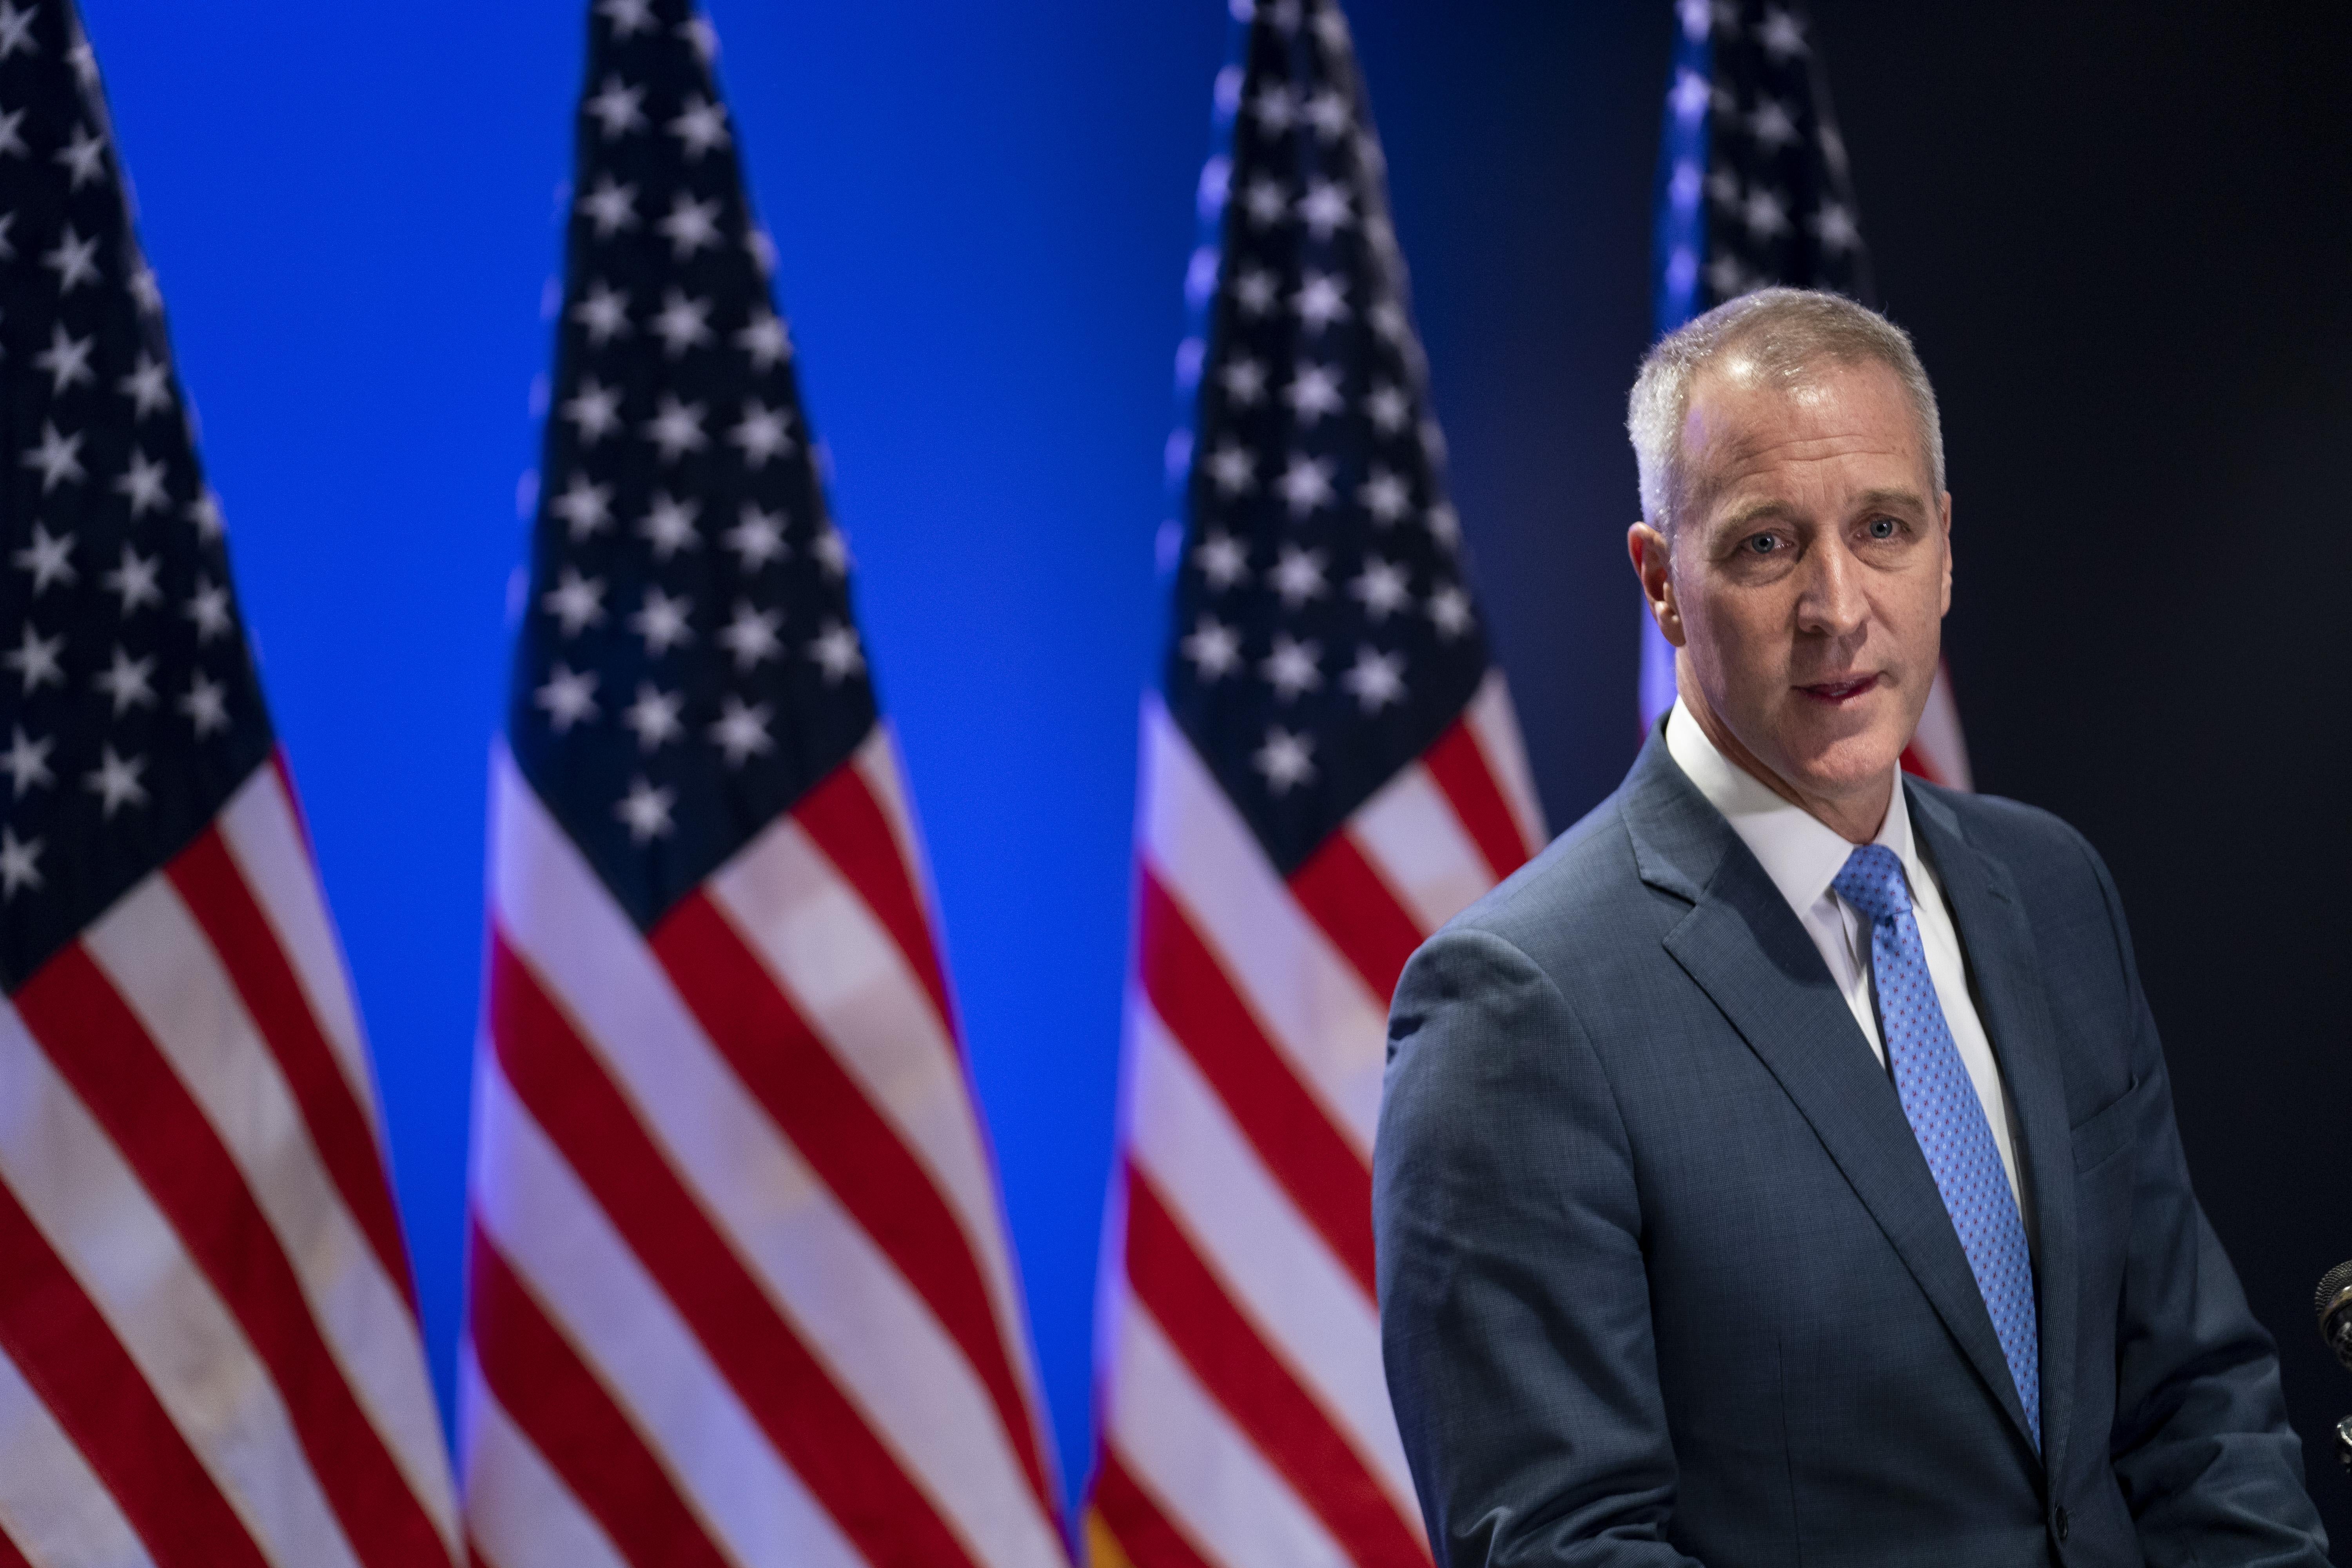 Rep. Sean Patrick Maloney (D-NY), leader of the Democratic Congressional Campaign Committee, speaks during a news conference shortly after conceding to opponent Mike Lawler at the DCCC on November 9, 2022 in Washington, DC. Americans participated in the midterm elections to decide close races across the country after months of candidate campaigning. (Photo by Sarah Silbiger/Getty Images)